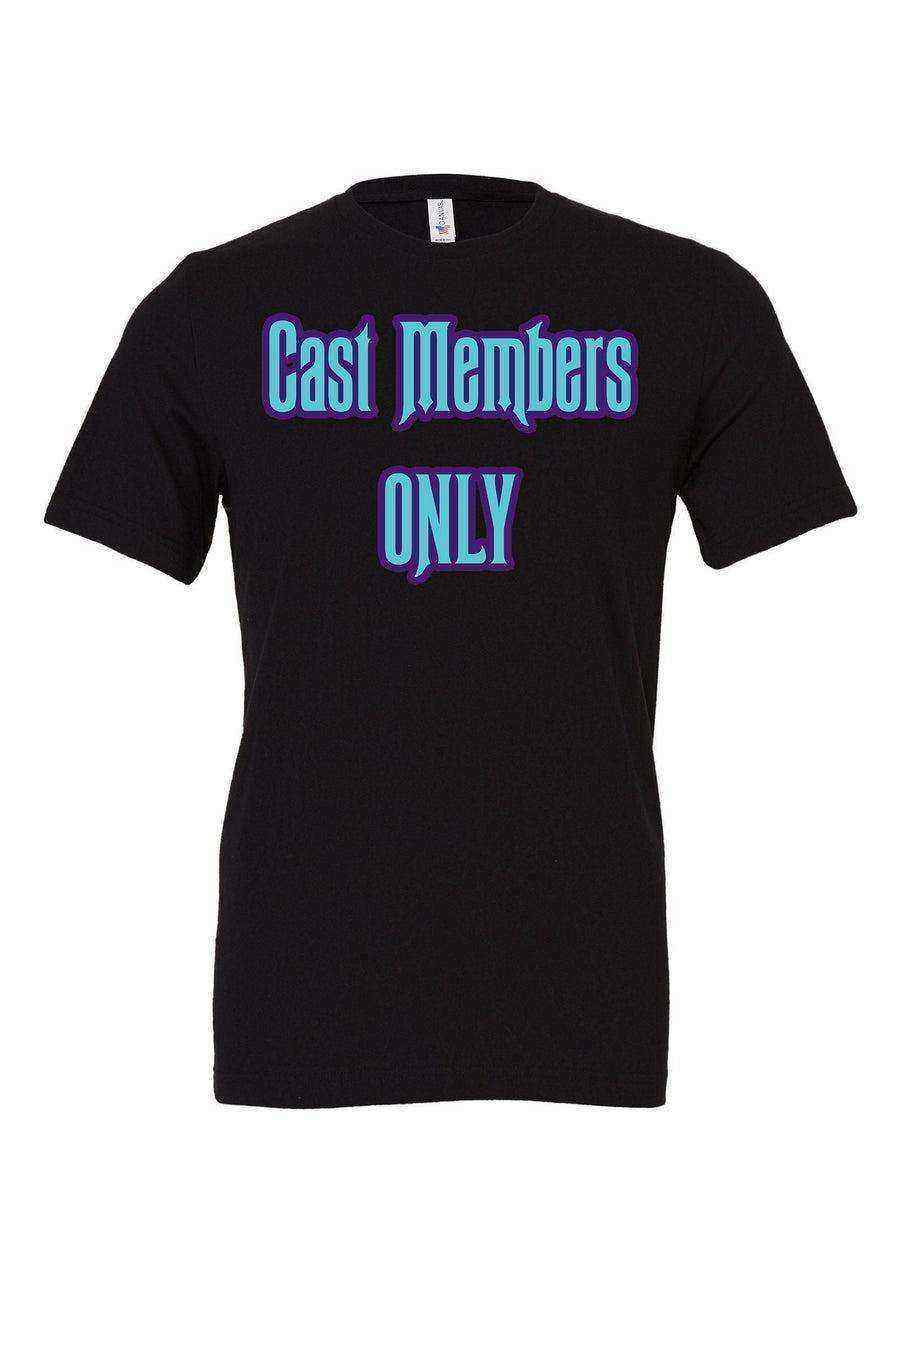 Toddler | Cast Members Only Haunted Mansion Shirt | Hitchhiking Ghosts Shirt - Dylan's Tees